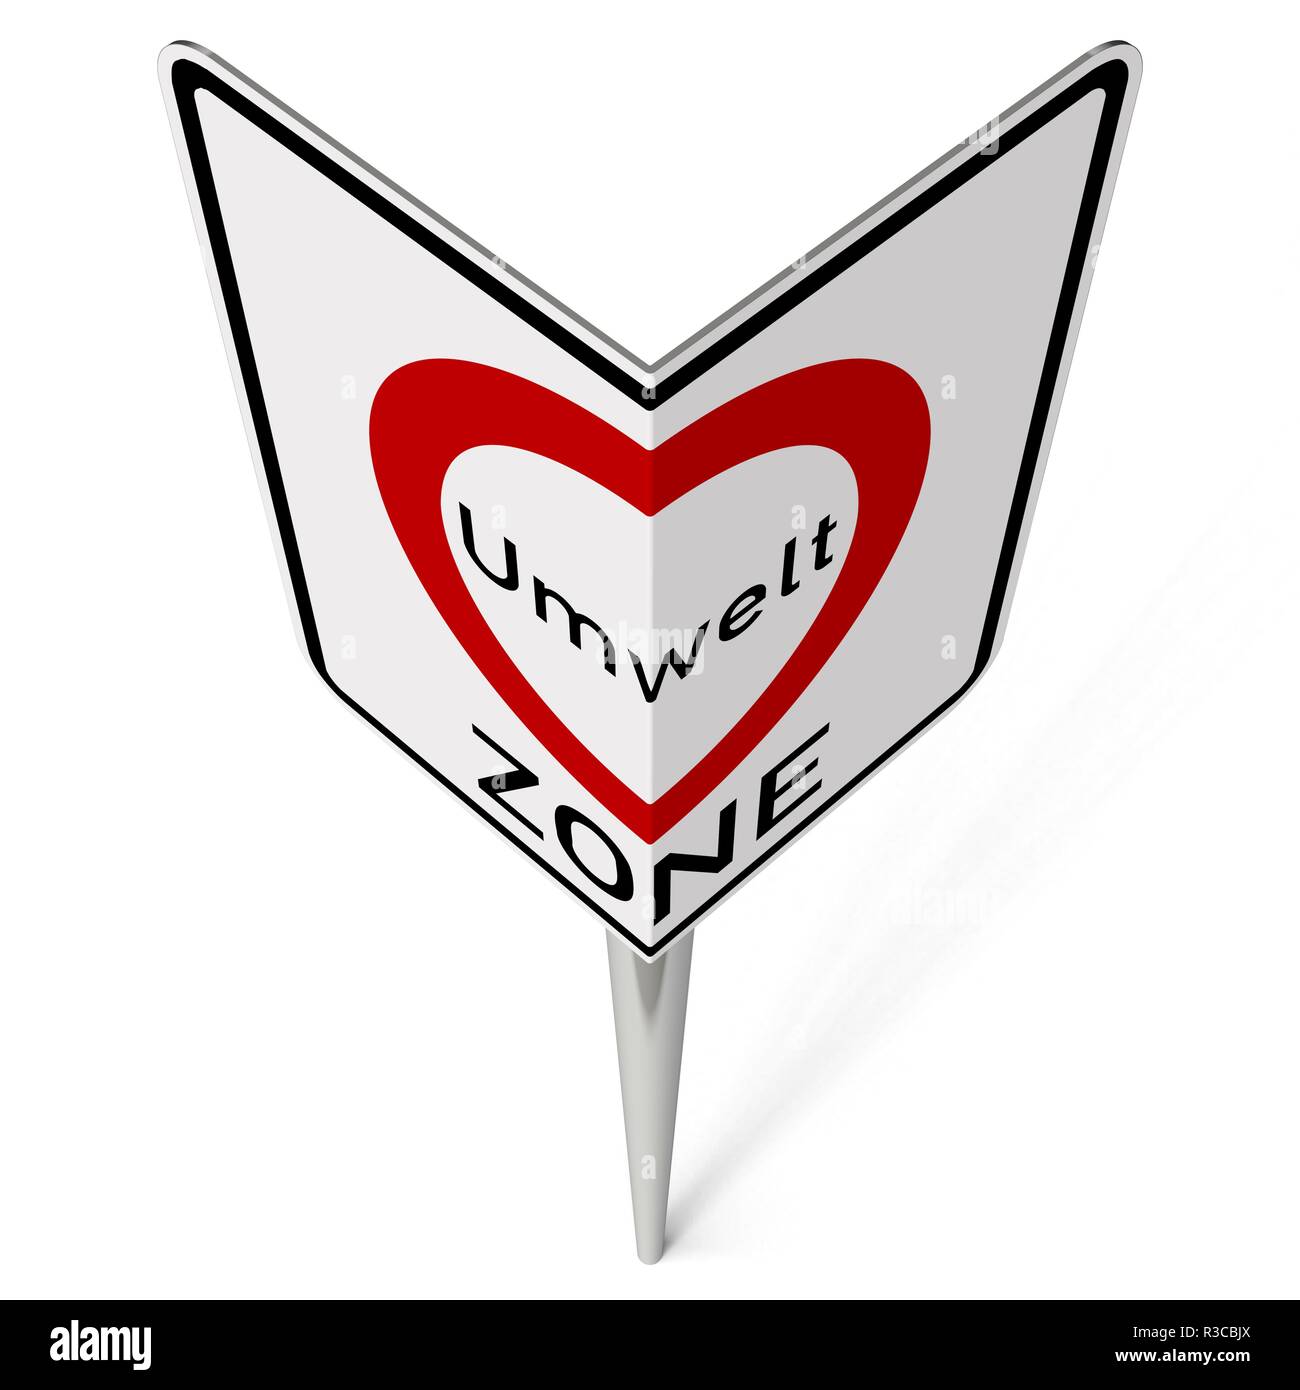 traffic sign environment zone forms heart Stock Photo